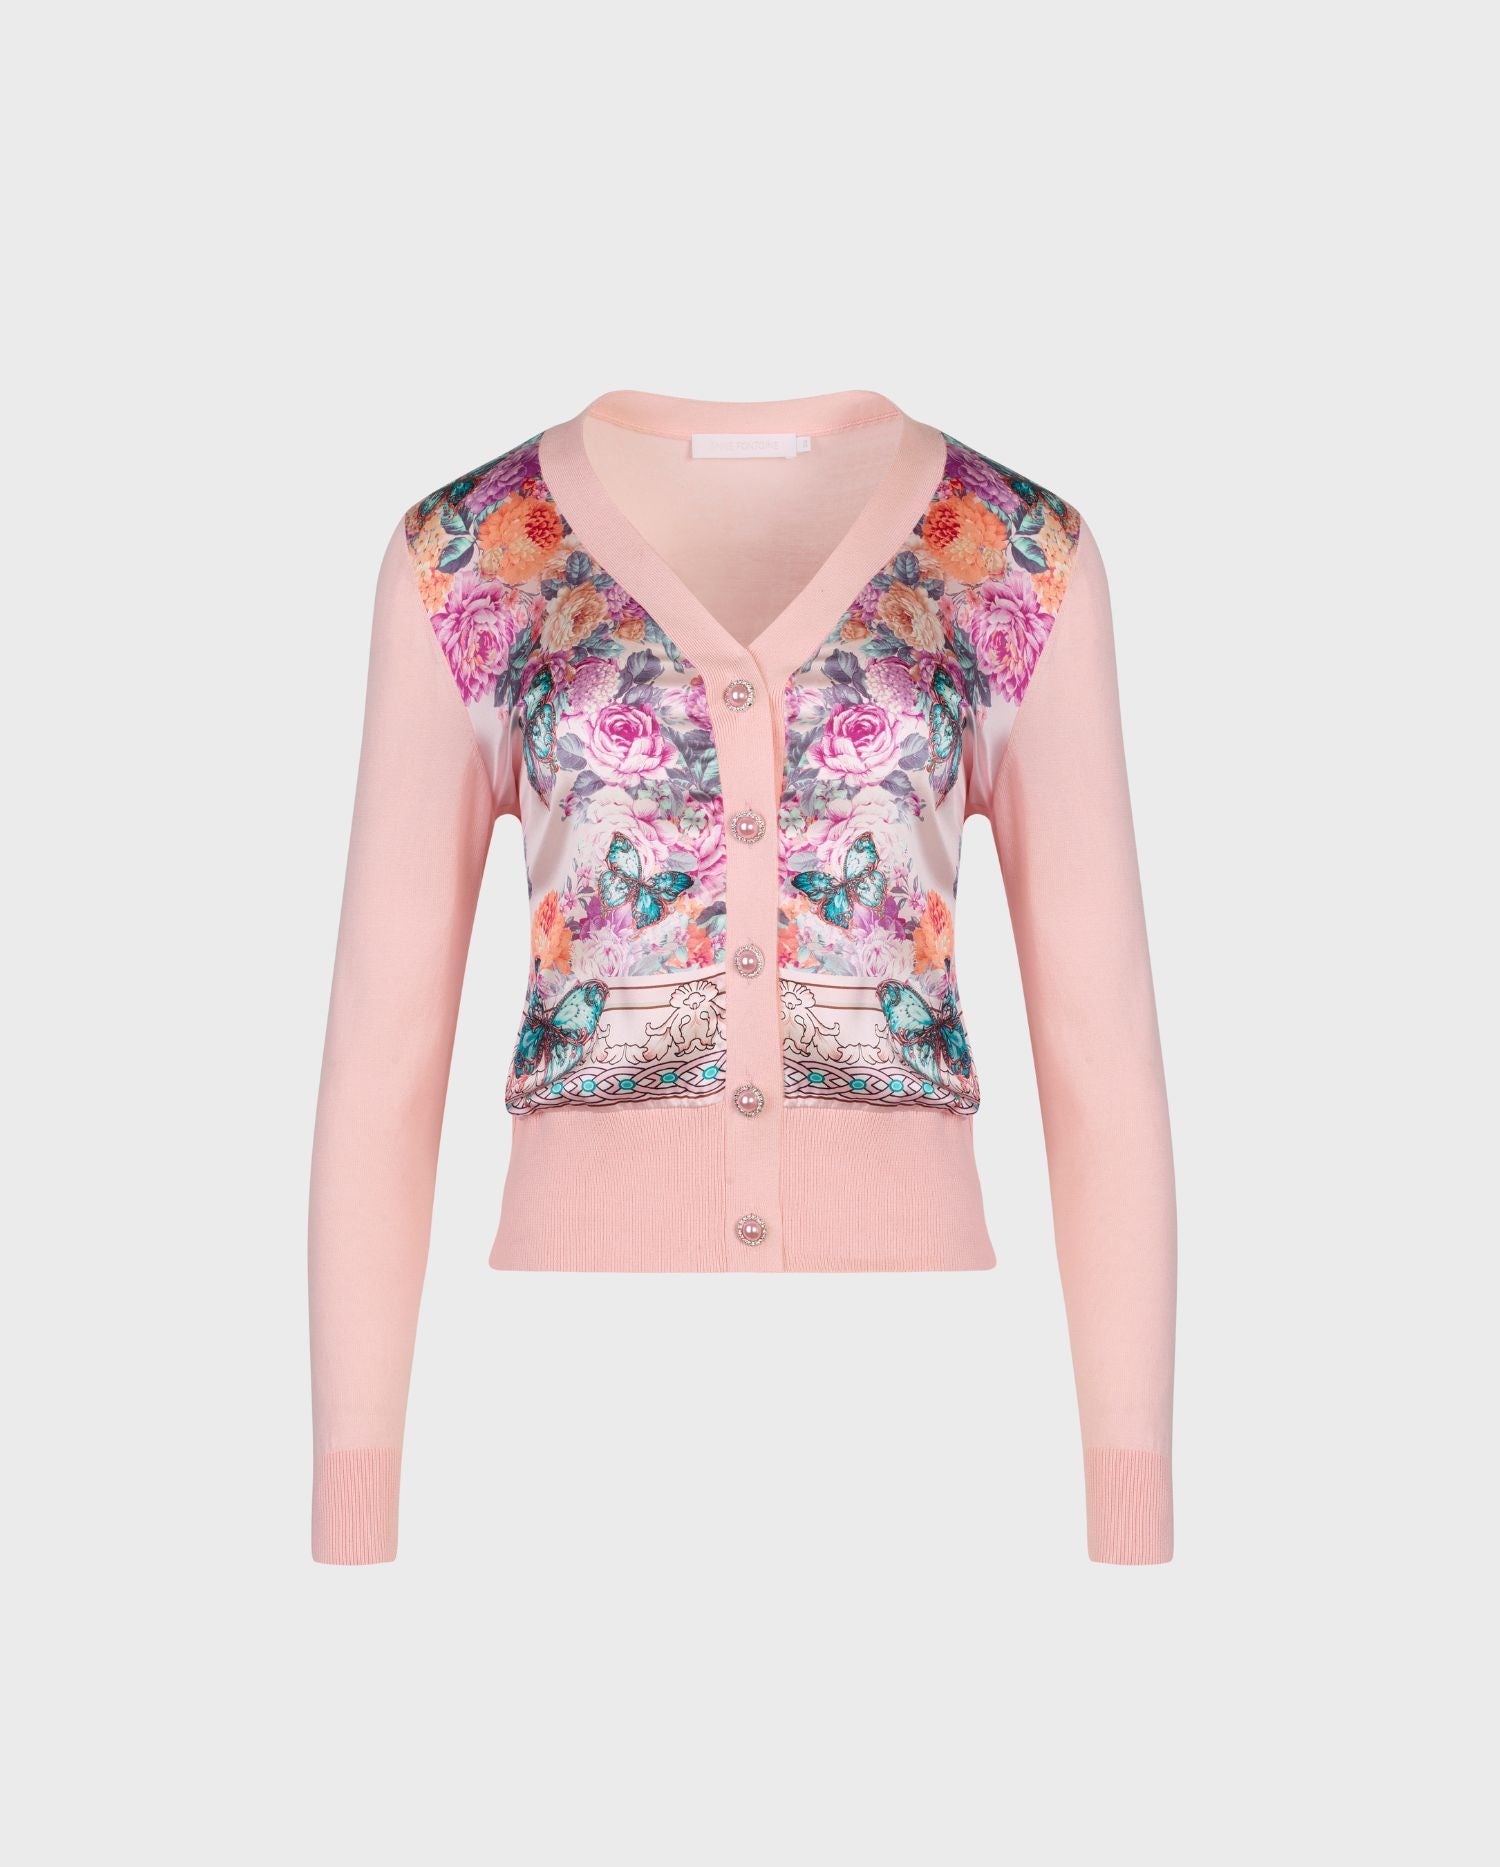 Discover the ZILIA Pink Long Sleeve Cardigan With Floral Butterfly Printed Design